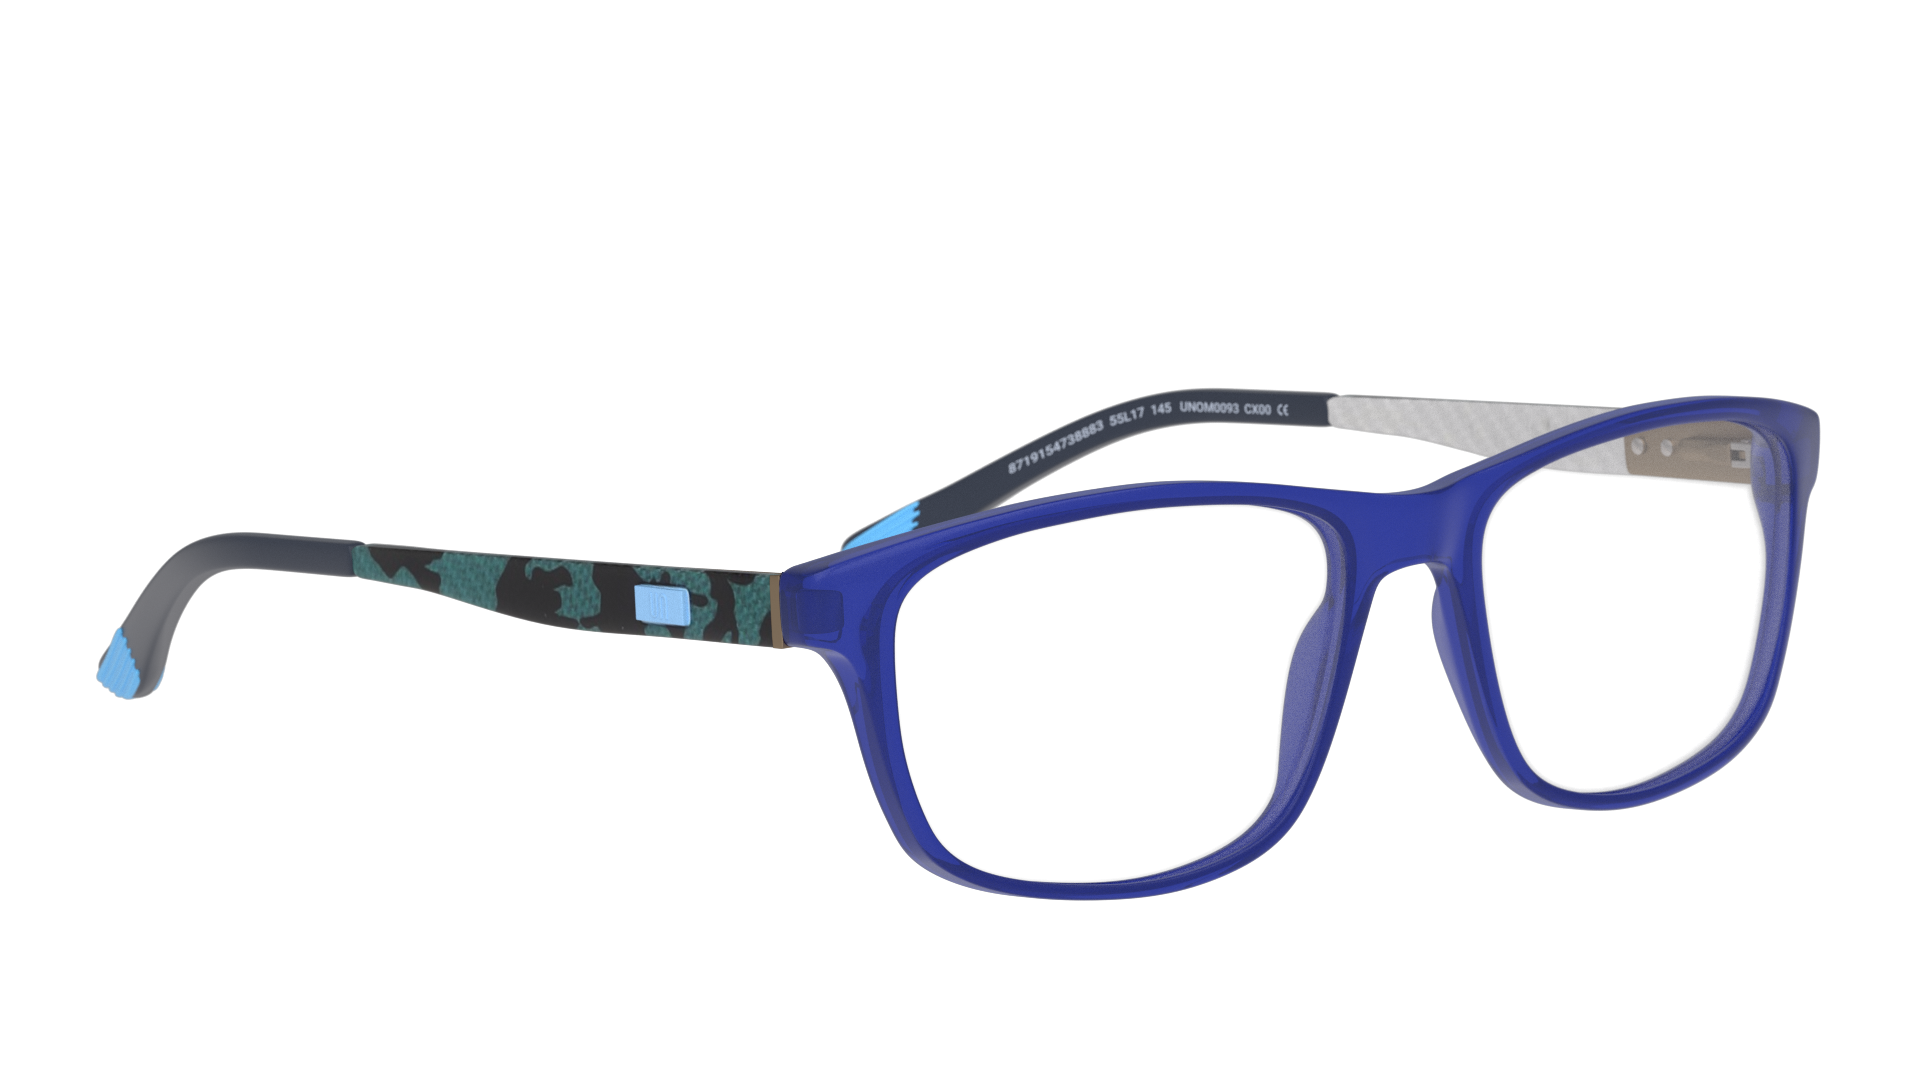 Angle_Right01 Unofficial UNOM0093 Glasses Transparent / Blue